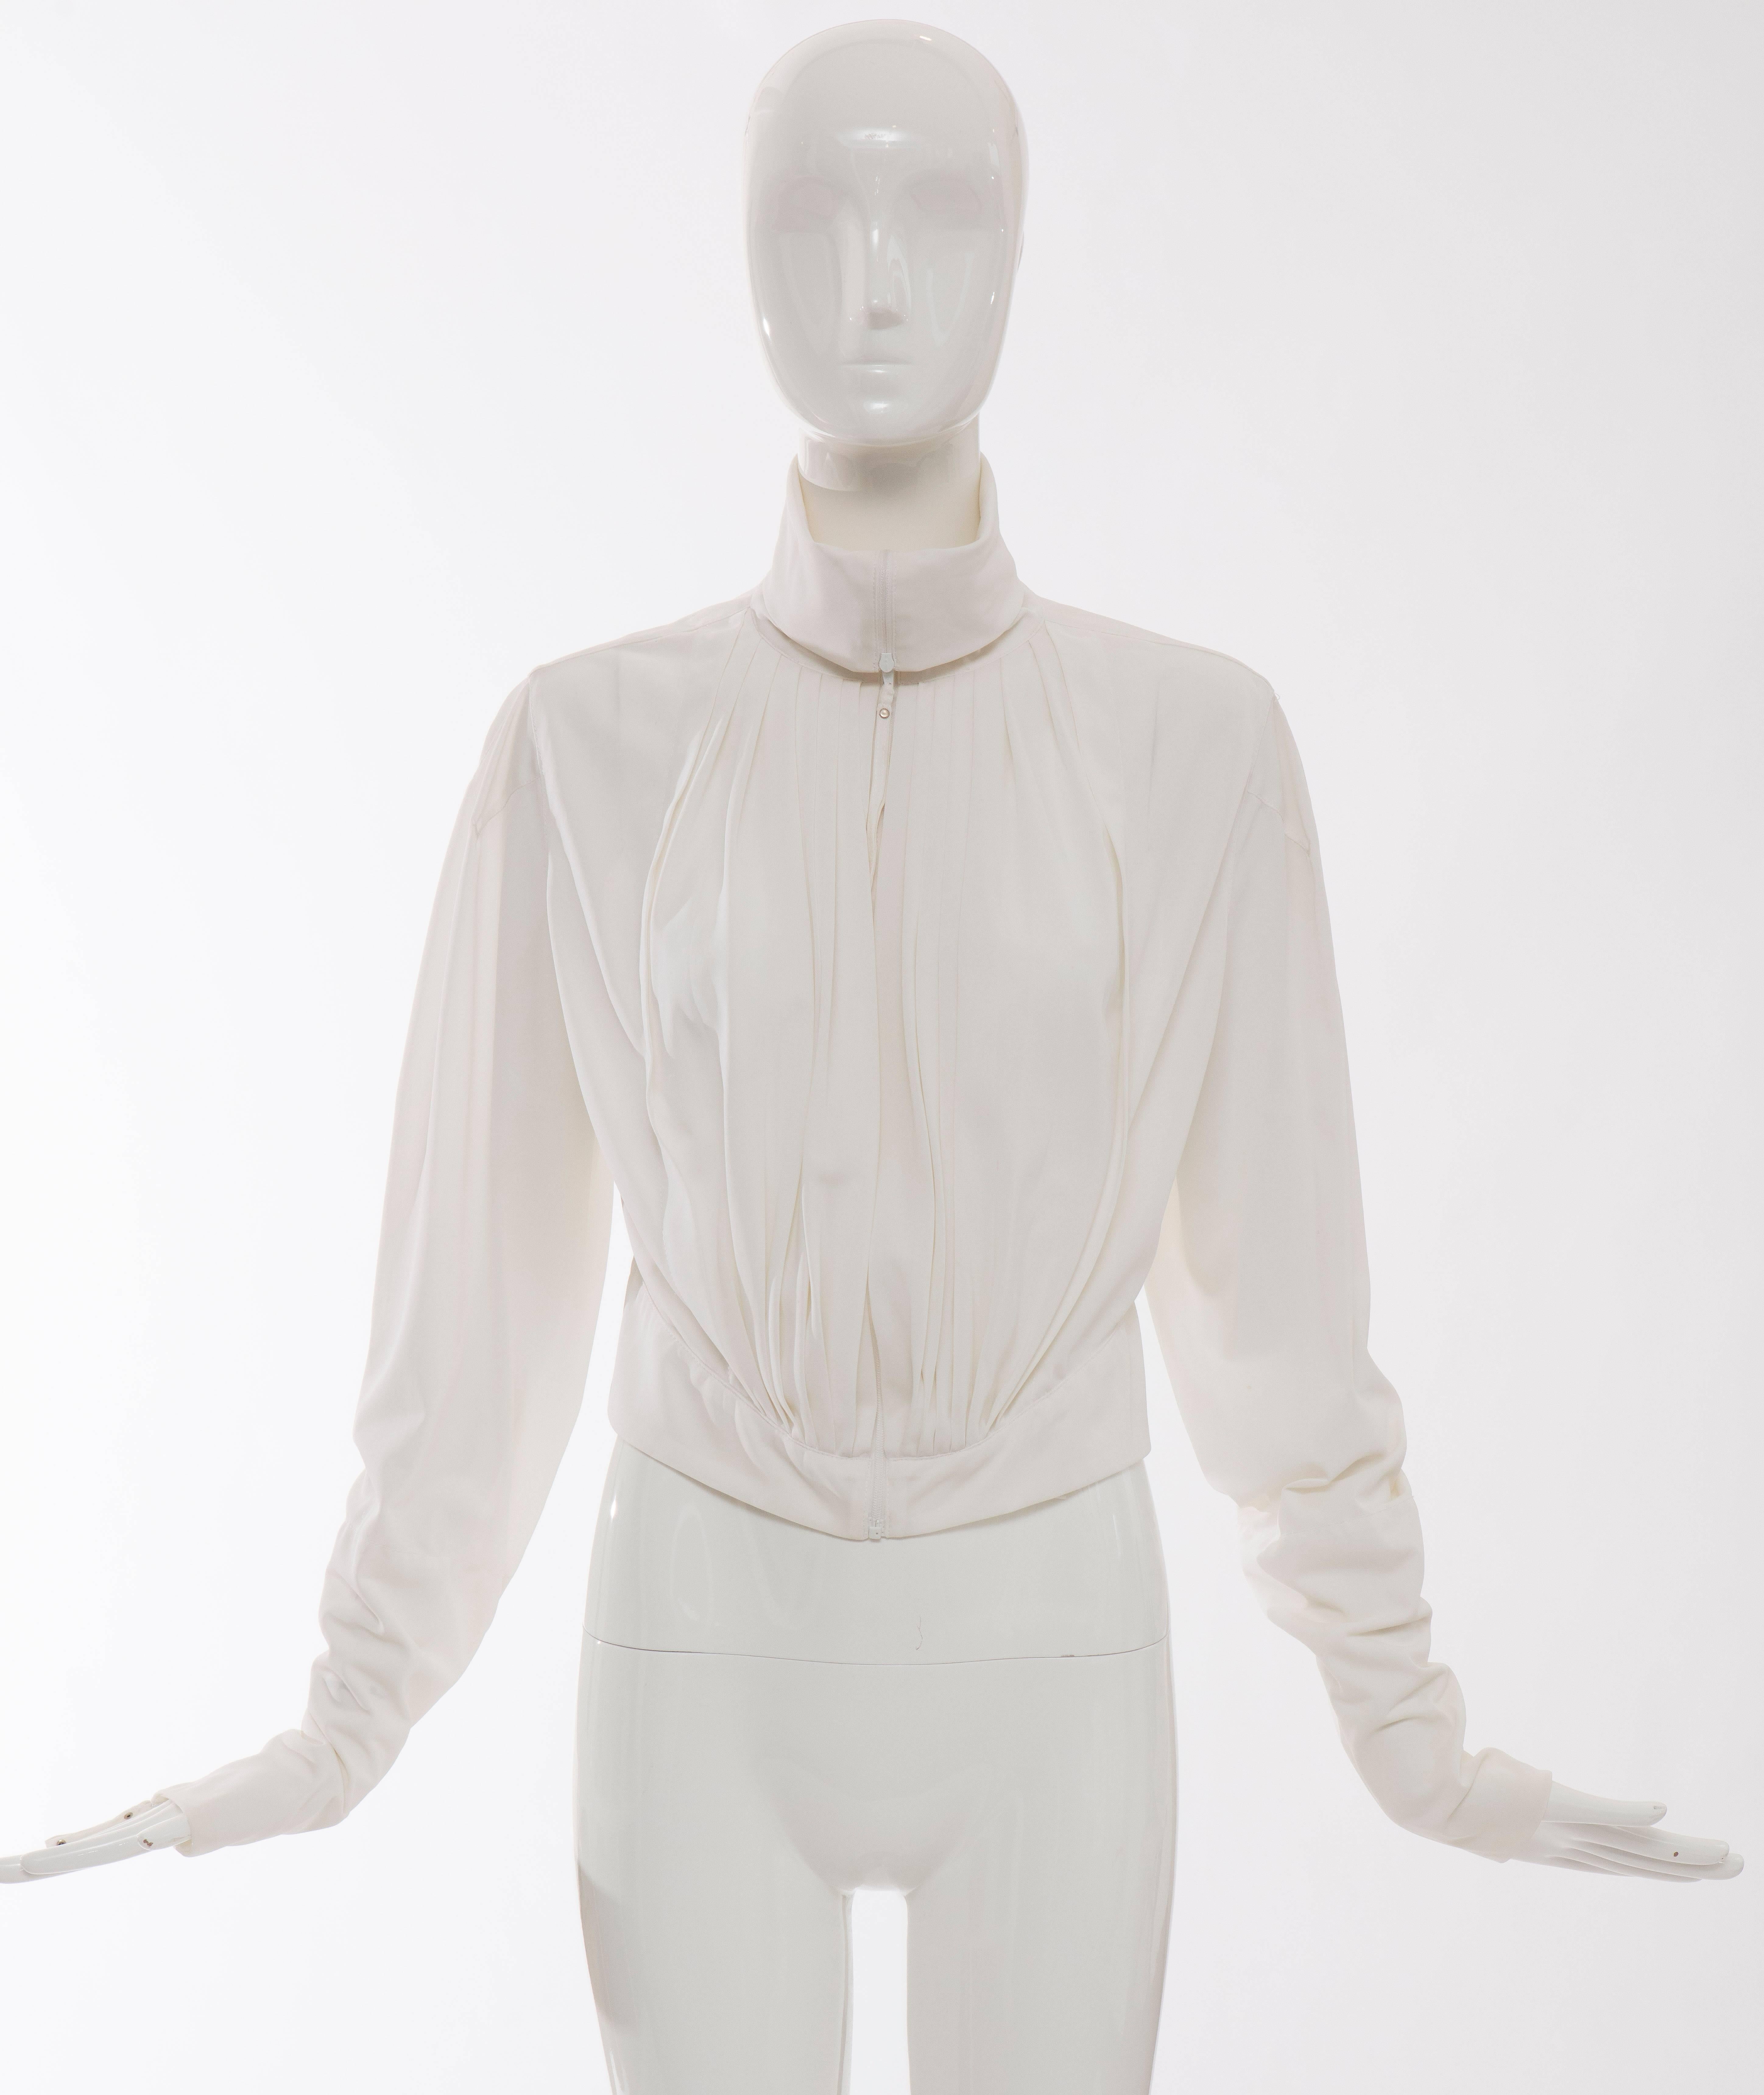 Jean Paul Gaultier, Circa 1990's white nylon, zip front pleated jacket with zip sleeves.

No Size Label

Bust 38, Waist 32, Sleeve 28, Length 18

